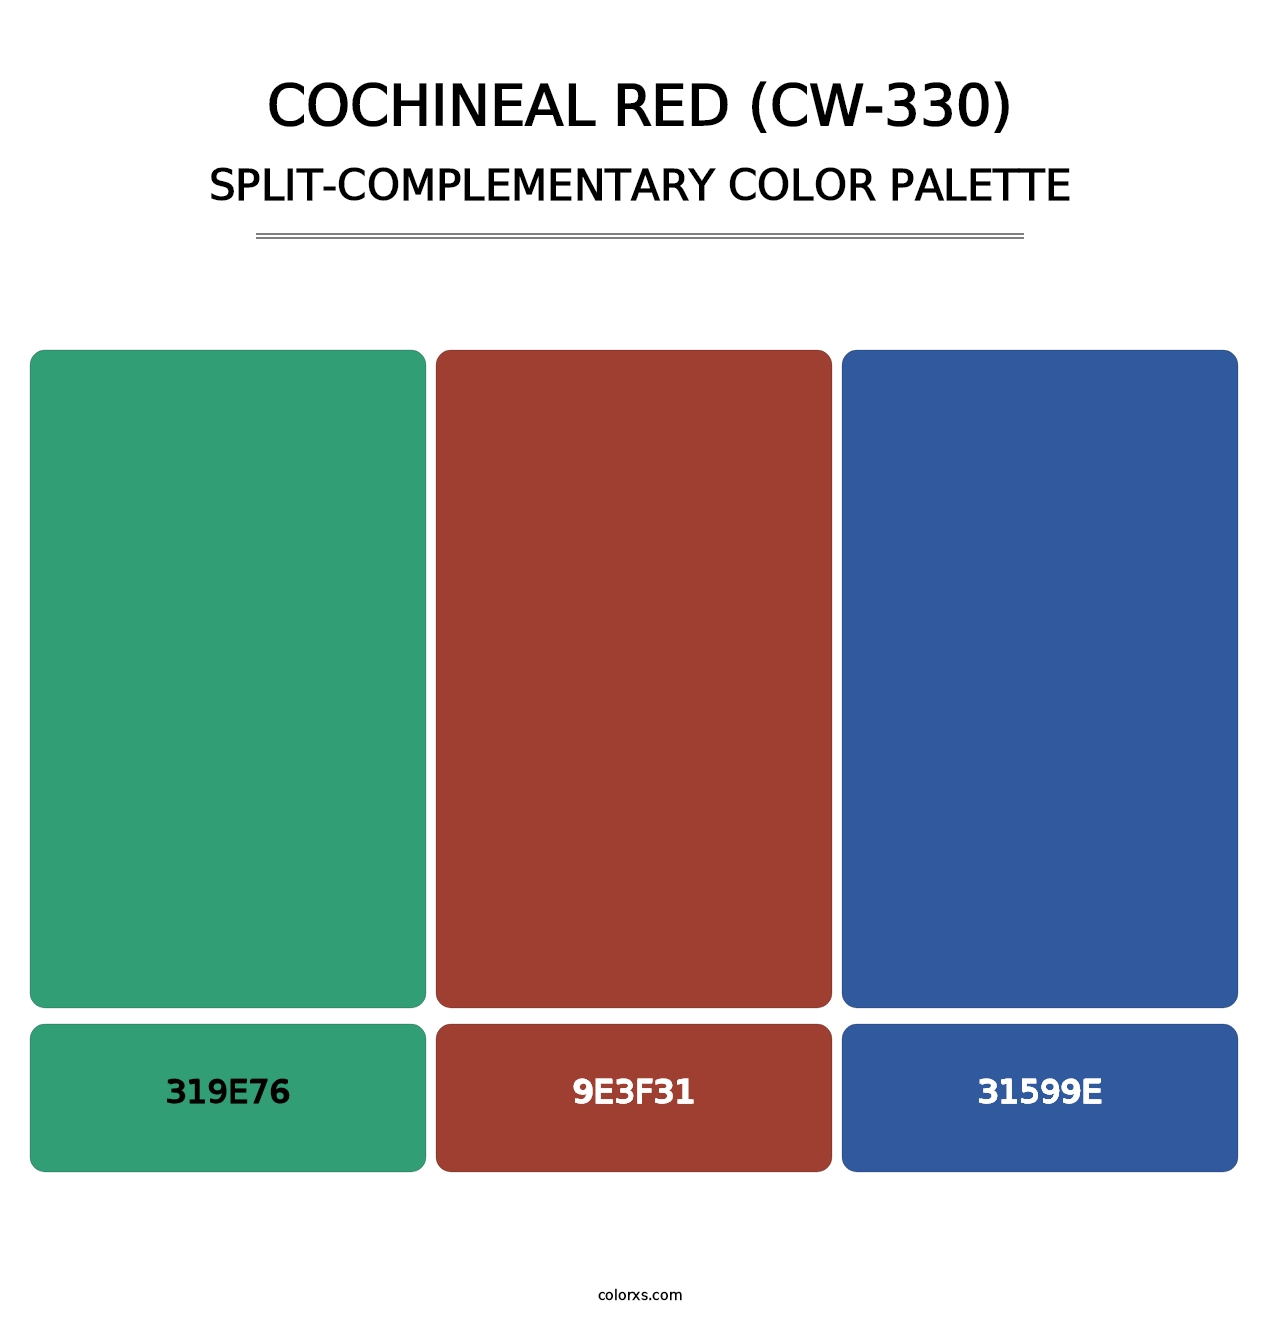 Cochineal Red (CW-330) - Split-Complementary Color Palette